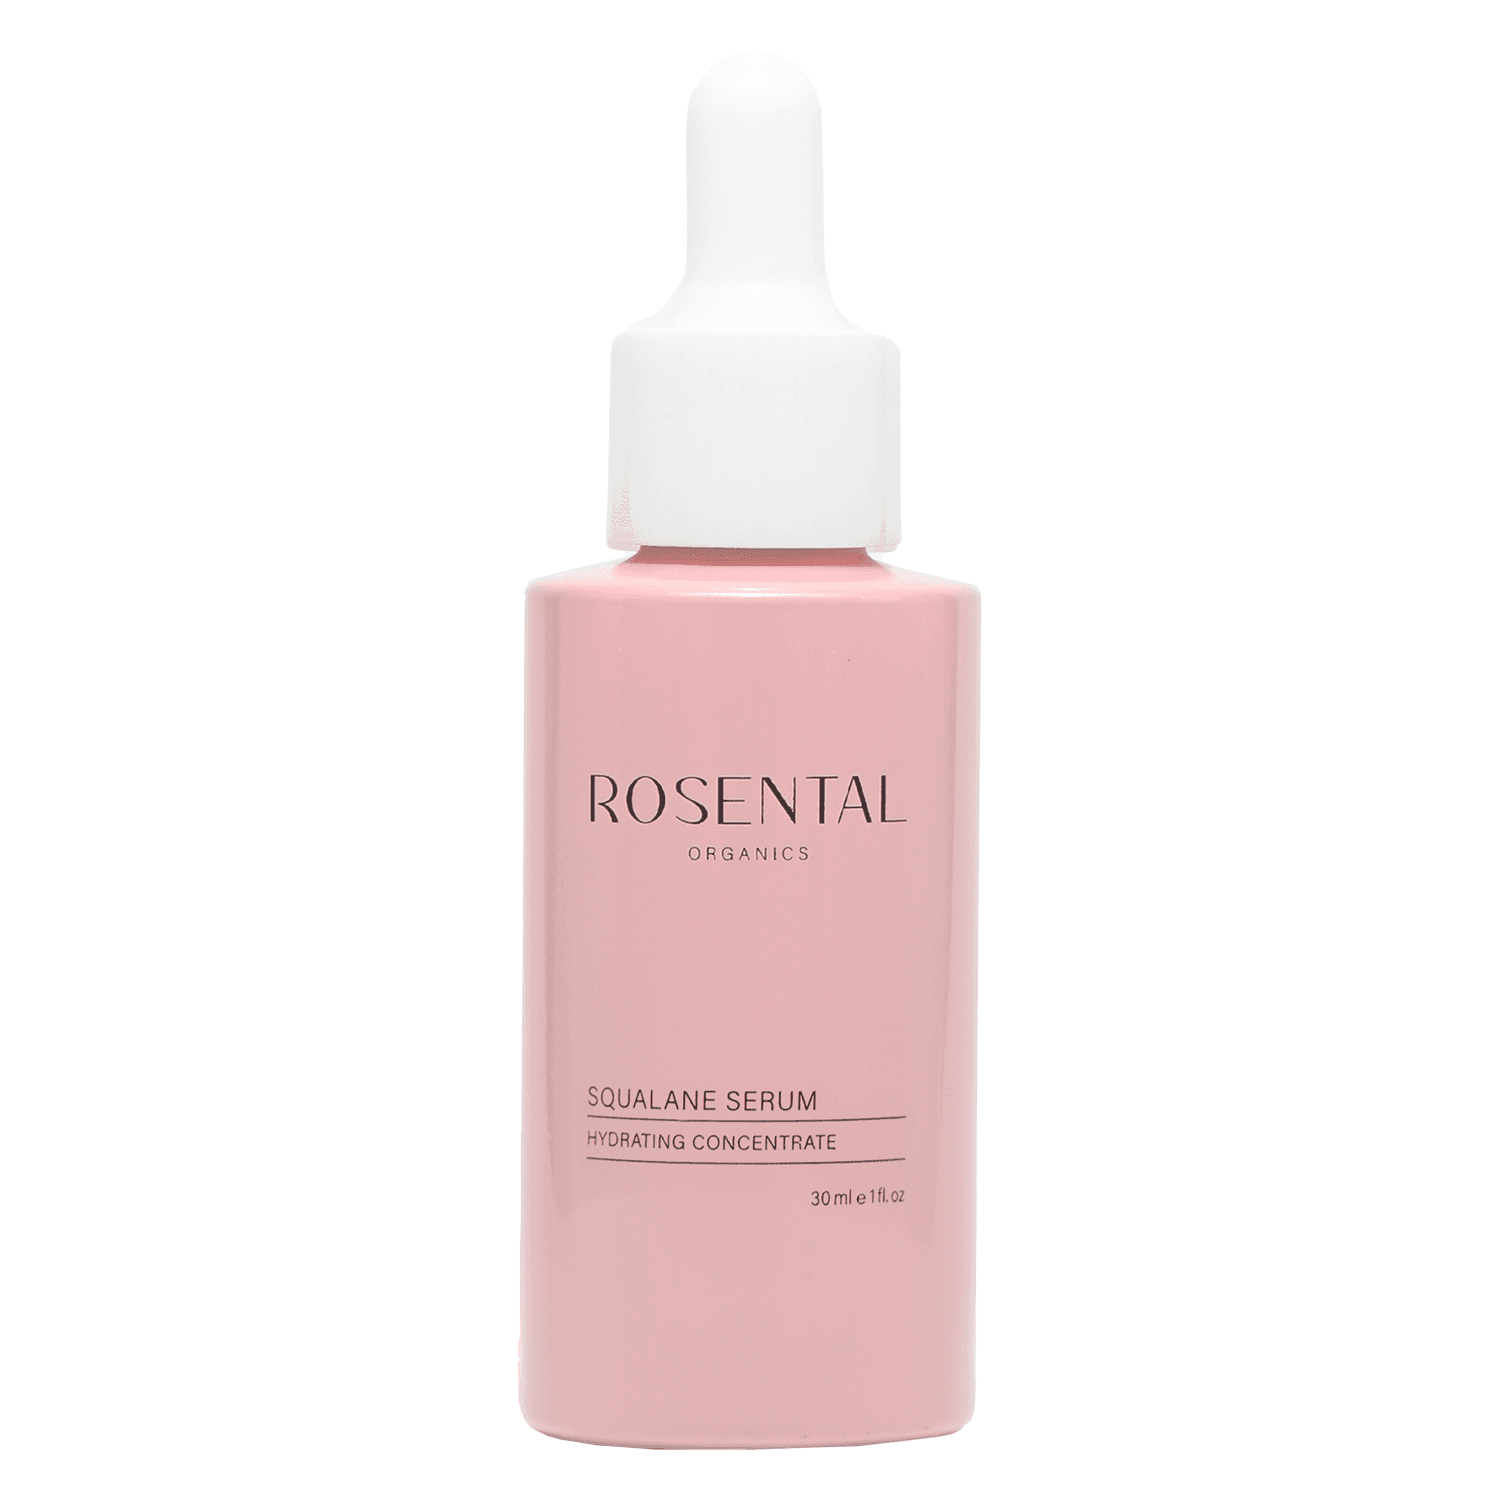 Rosental Face Care - Squalane Serum Hydrating Concentrate